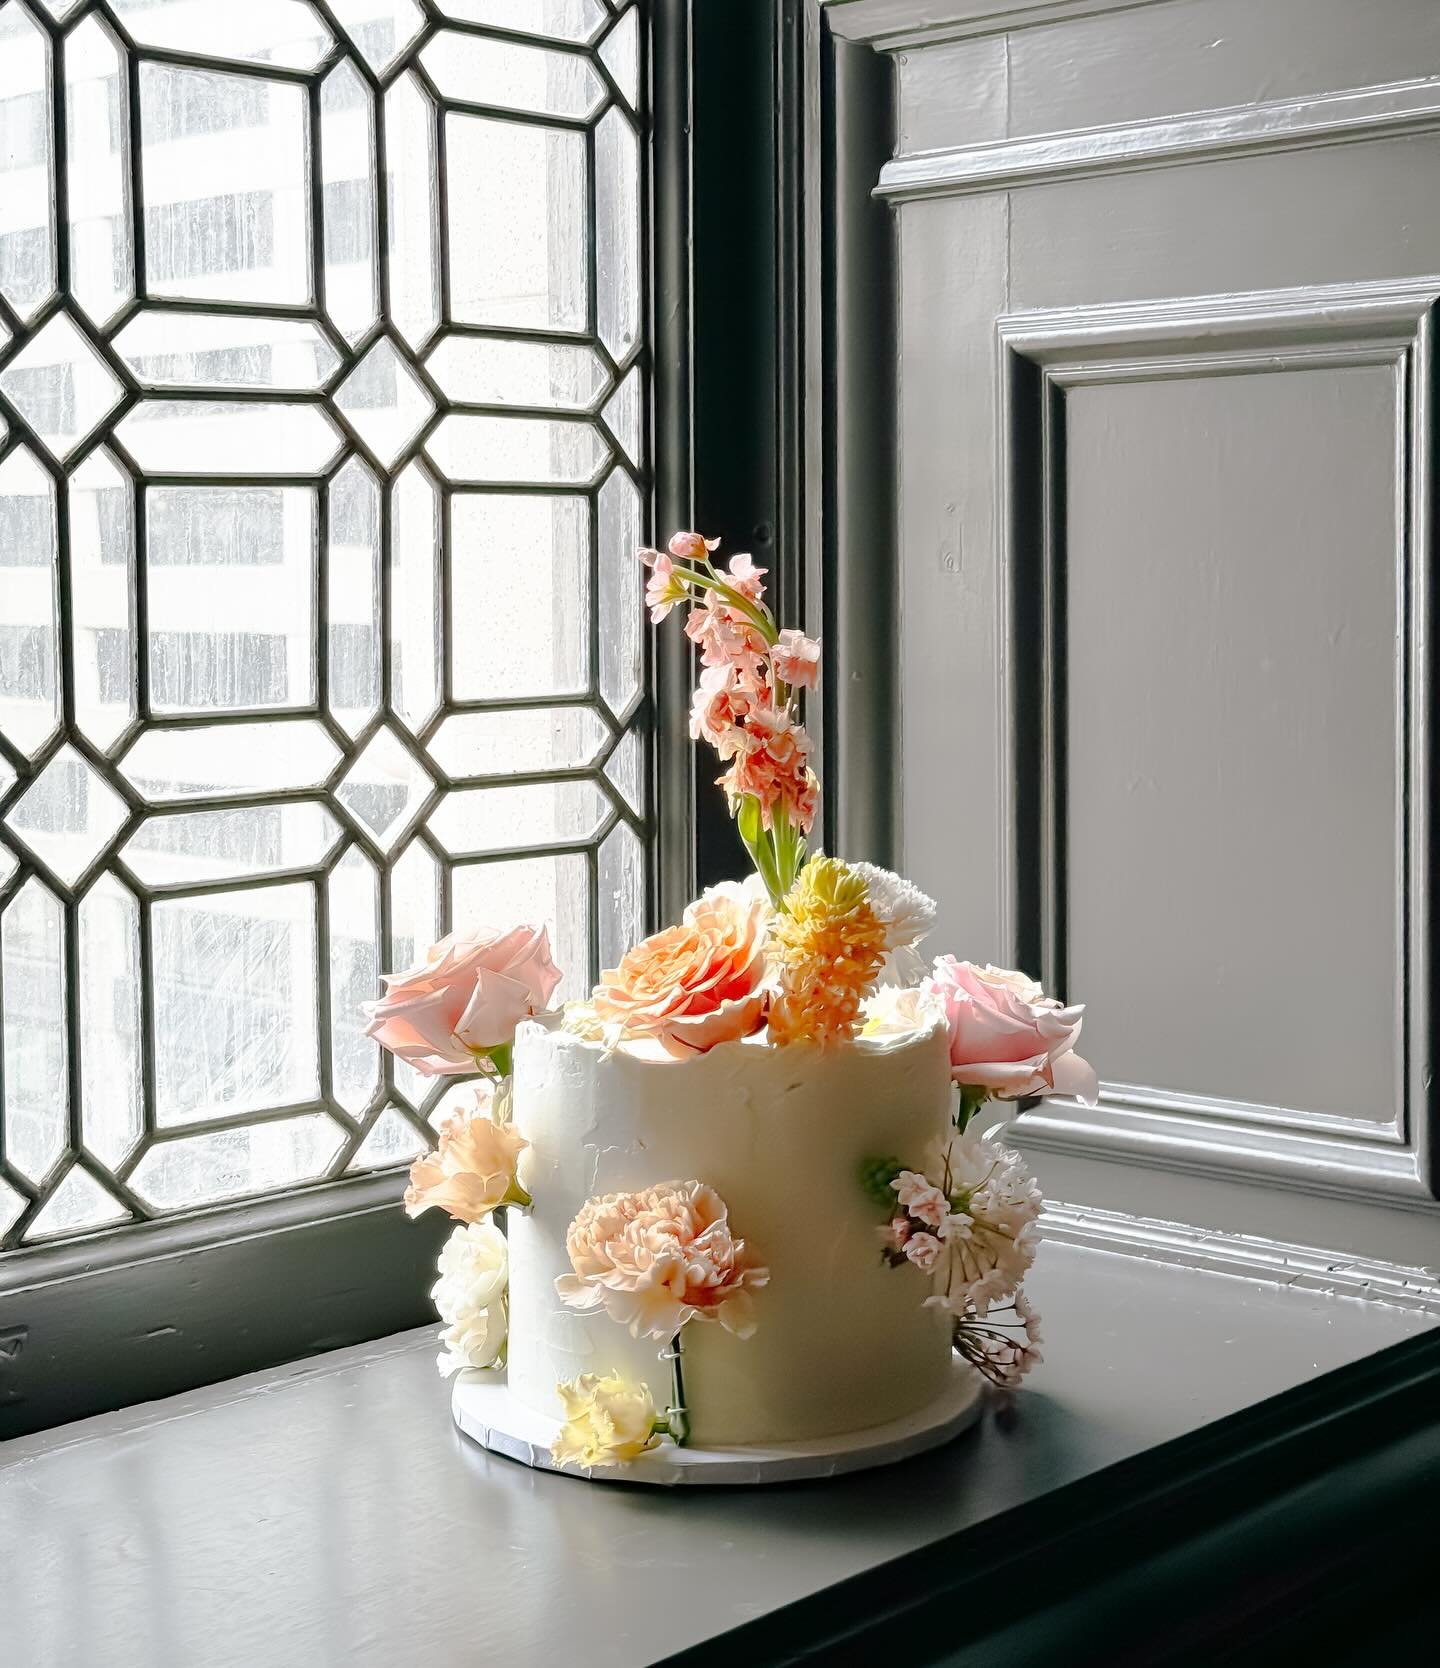 I heard that cake calories don&rsquo;t count on a wedding day&hellip; 😏

How stunning is this cake by @taylorelizabeth.cakes ??🤤
The florals by @goodearthfloral was such a magnificent touch!

Venue: @skylineandco
Planning + Design: @whateverislovel